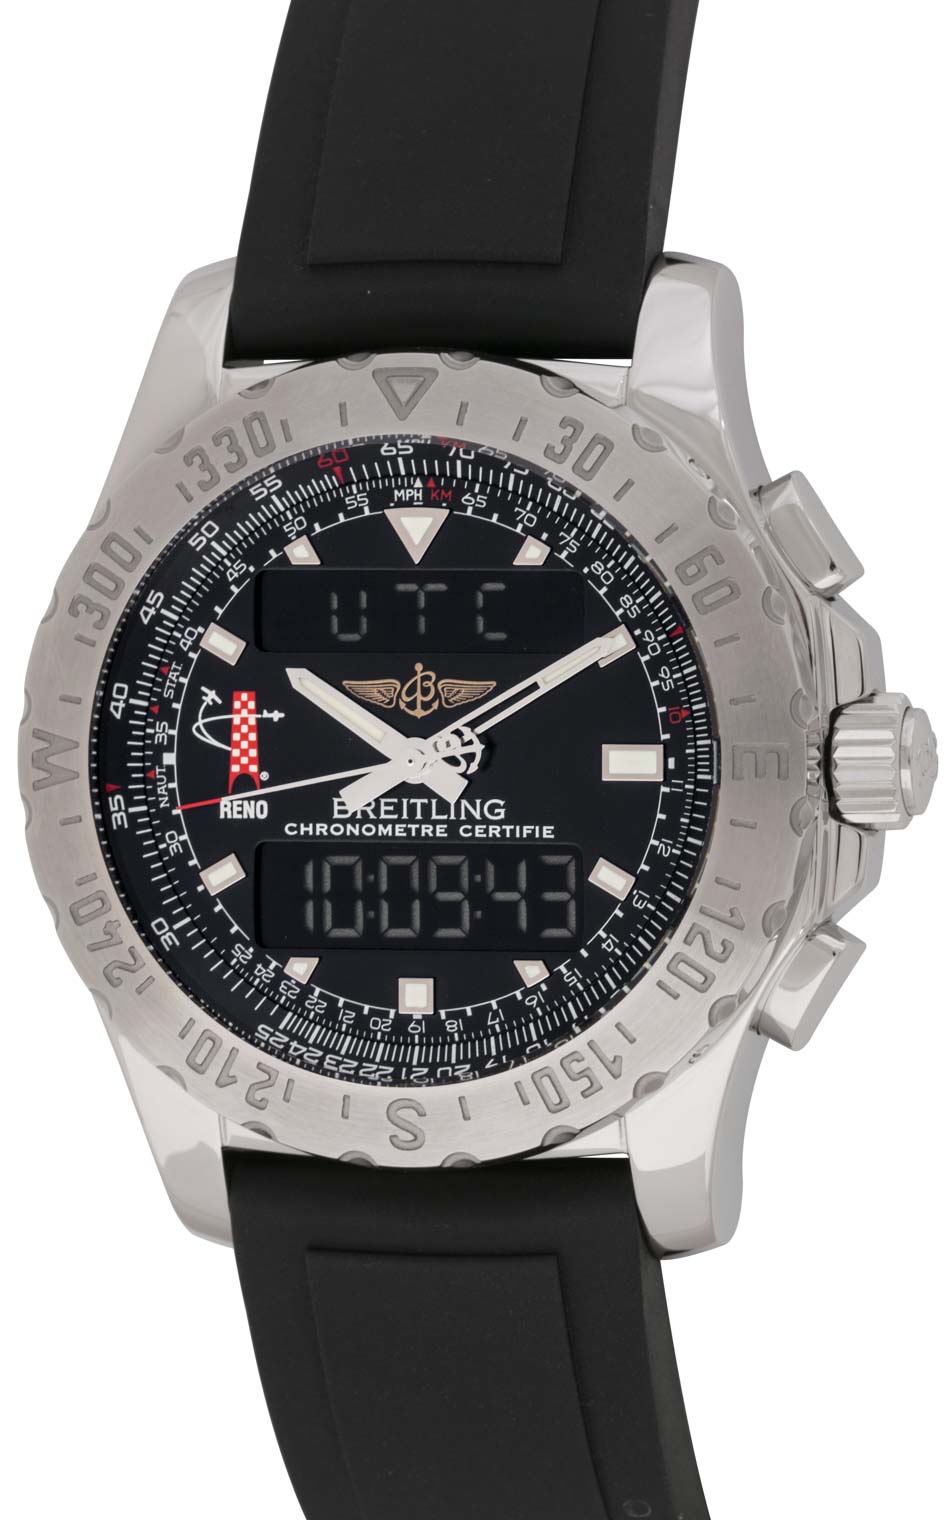 Breitling Airwolf Professional Chronograph Reno Air Show Limited